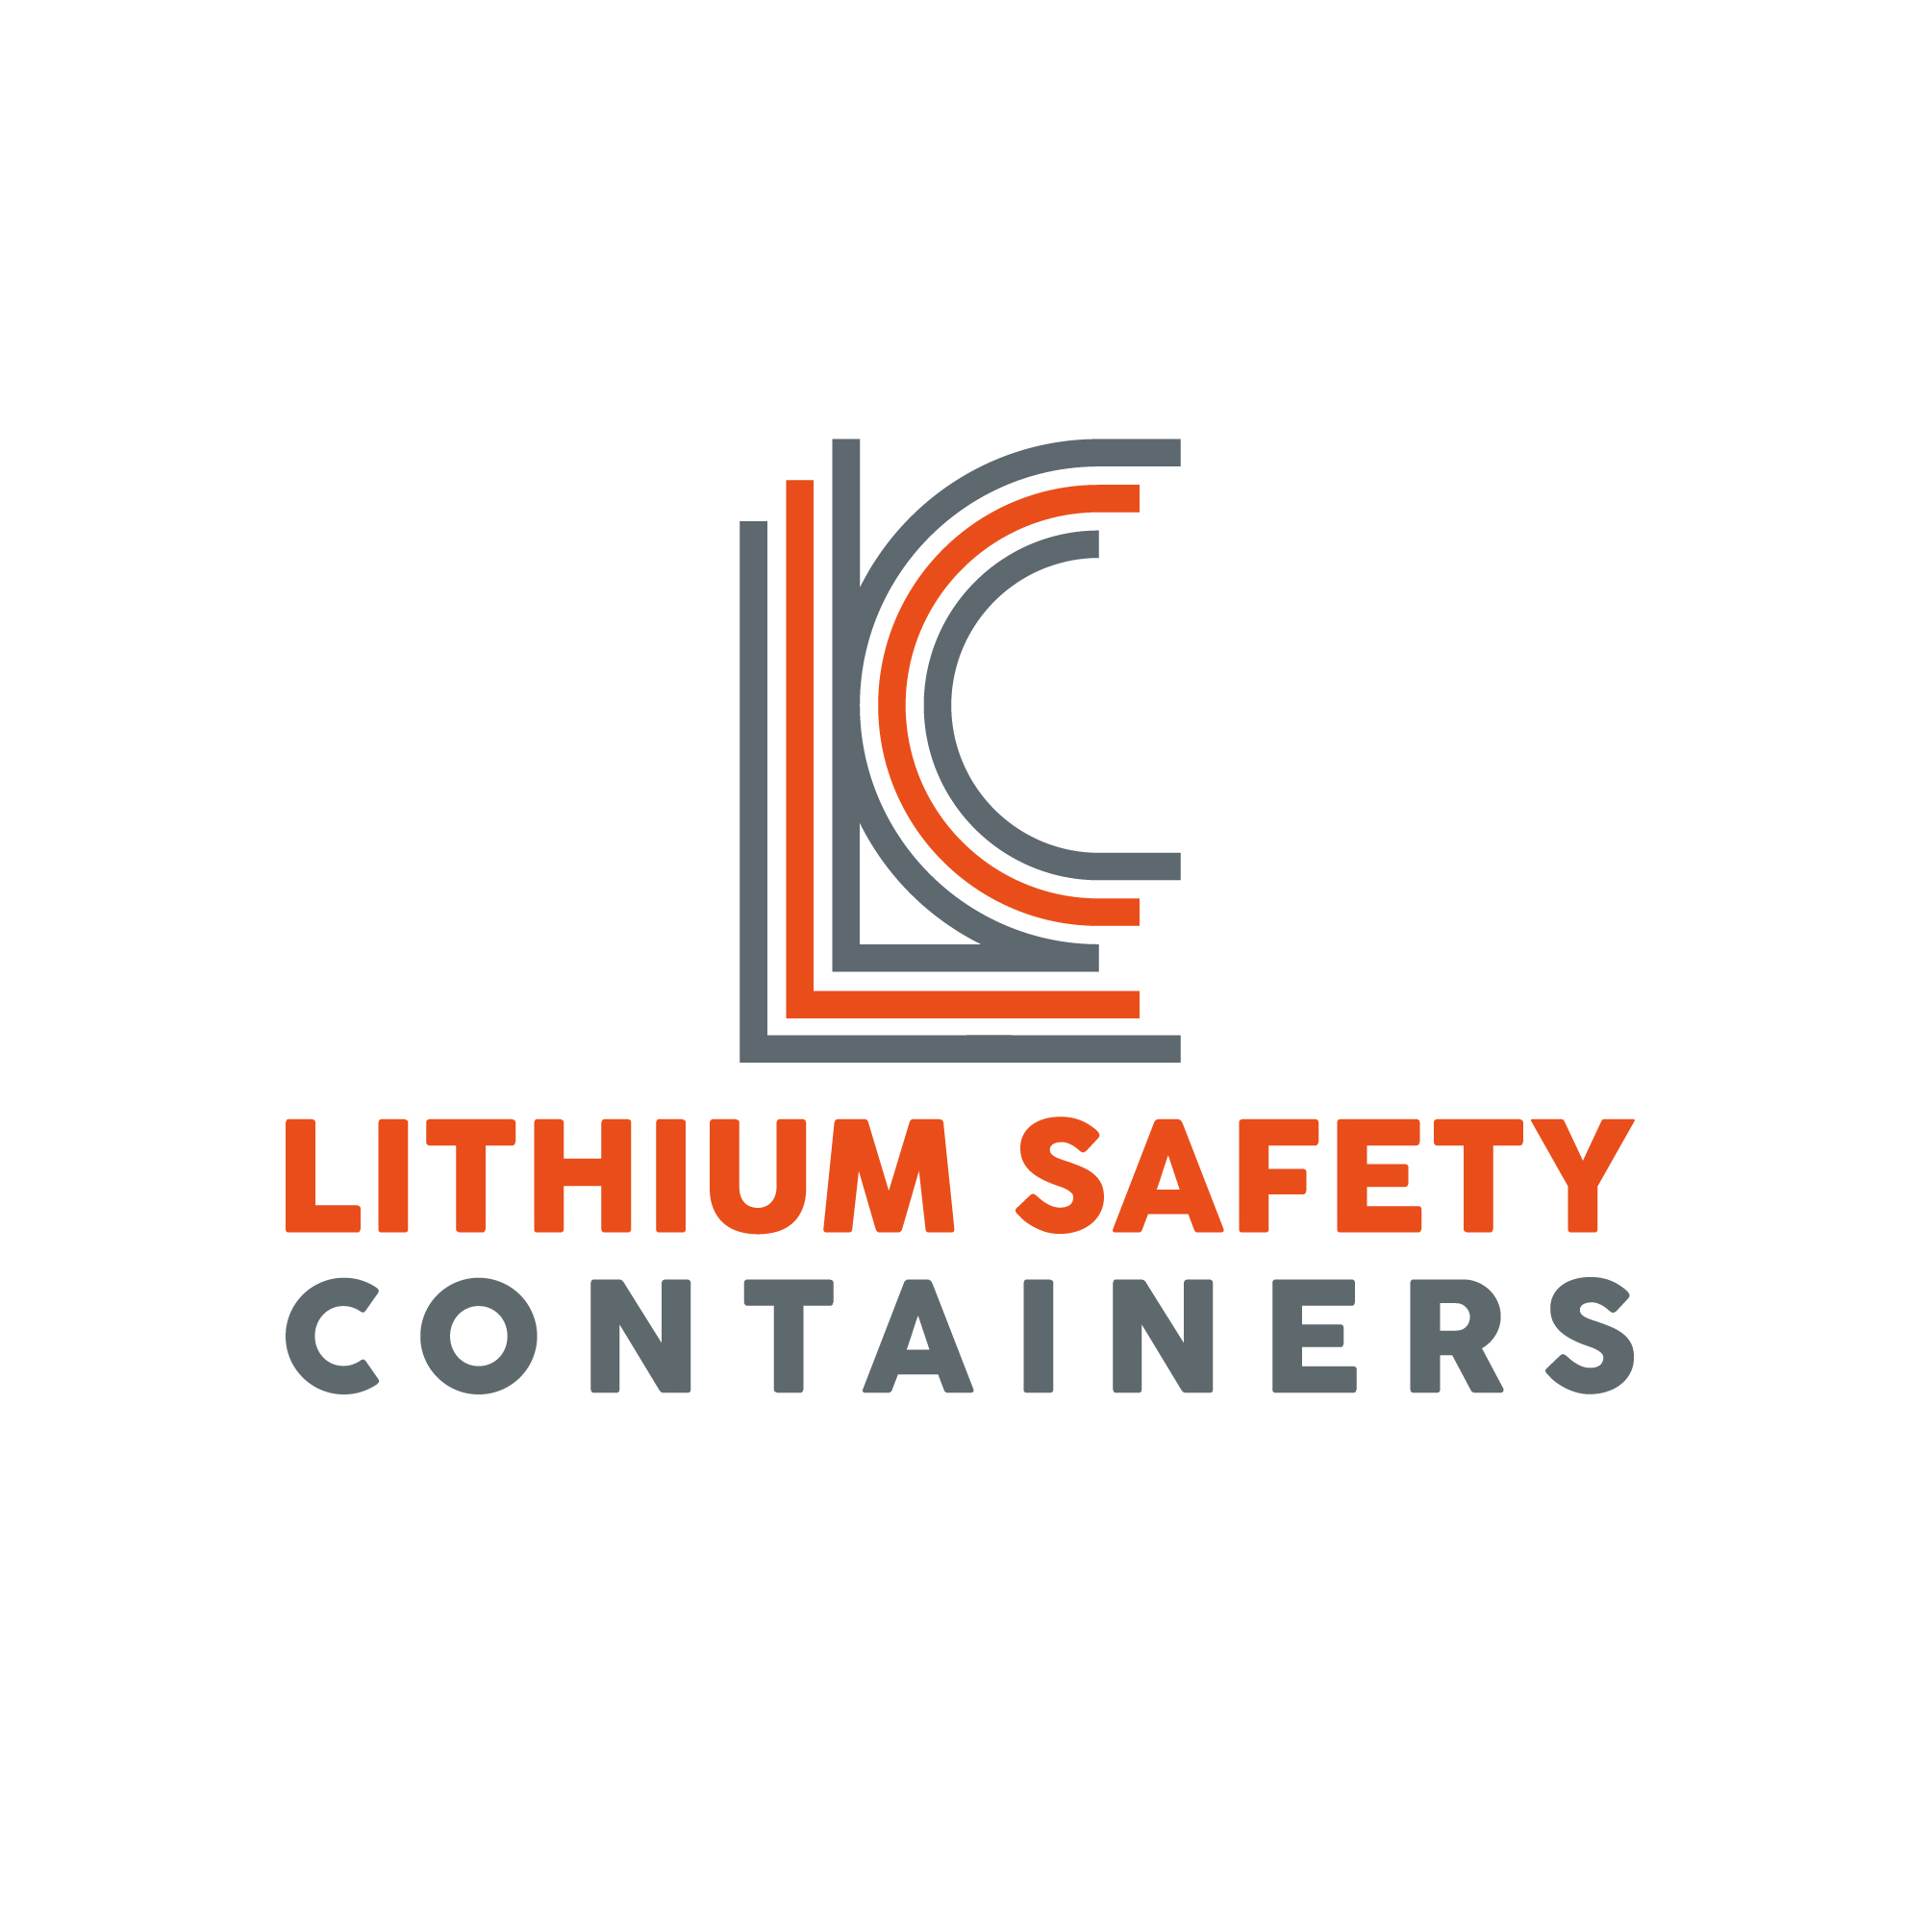 Lithium Safety Containers